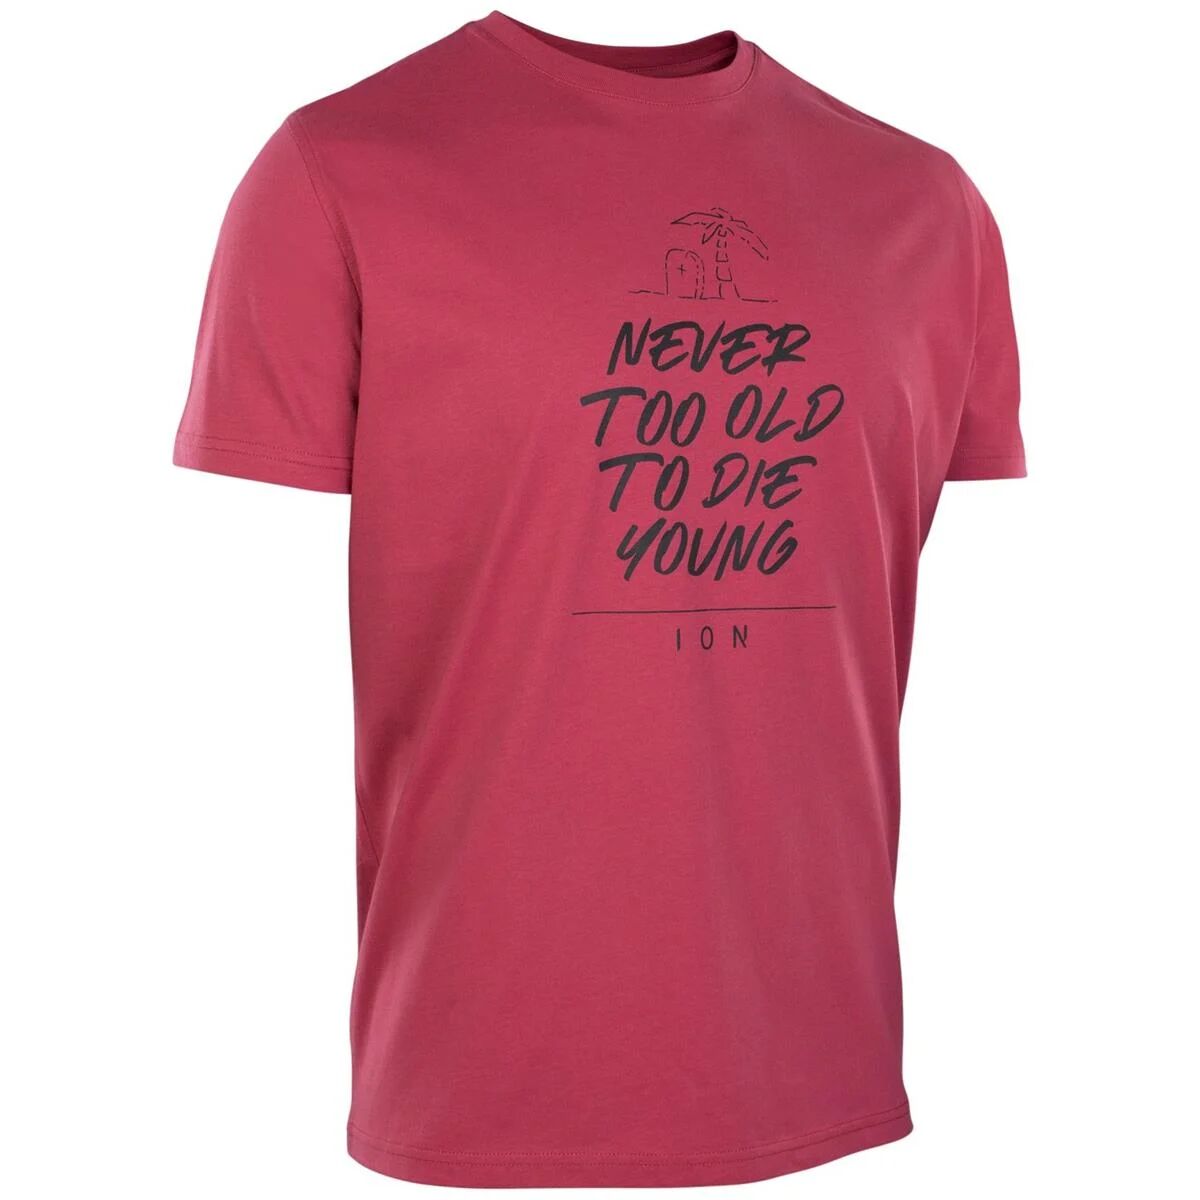 ION T-Shirt Never too old - M - Rouge